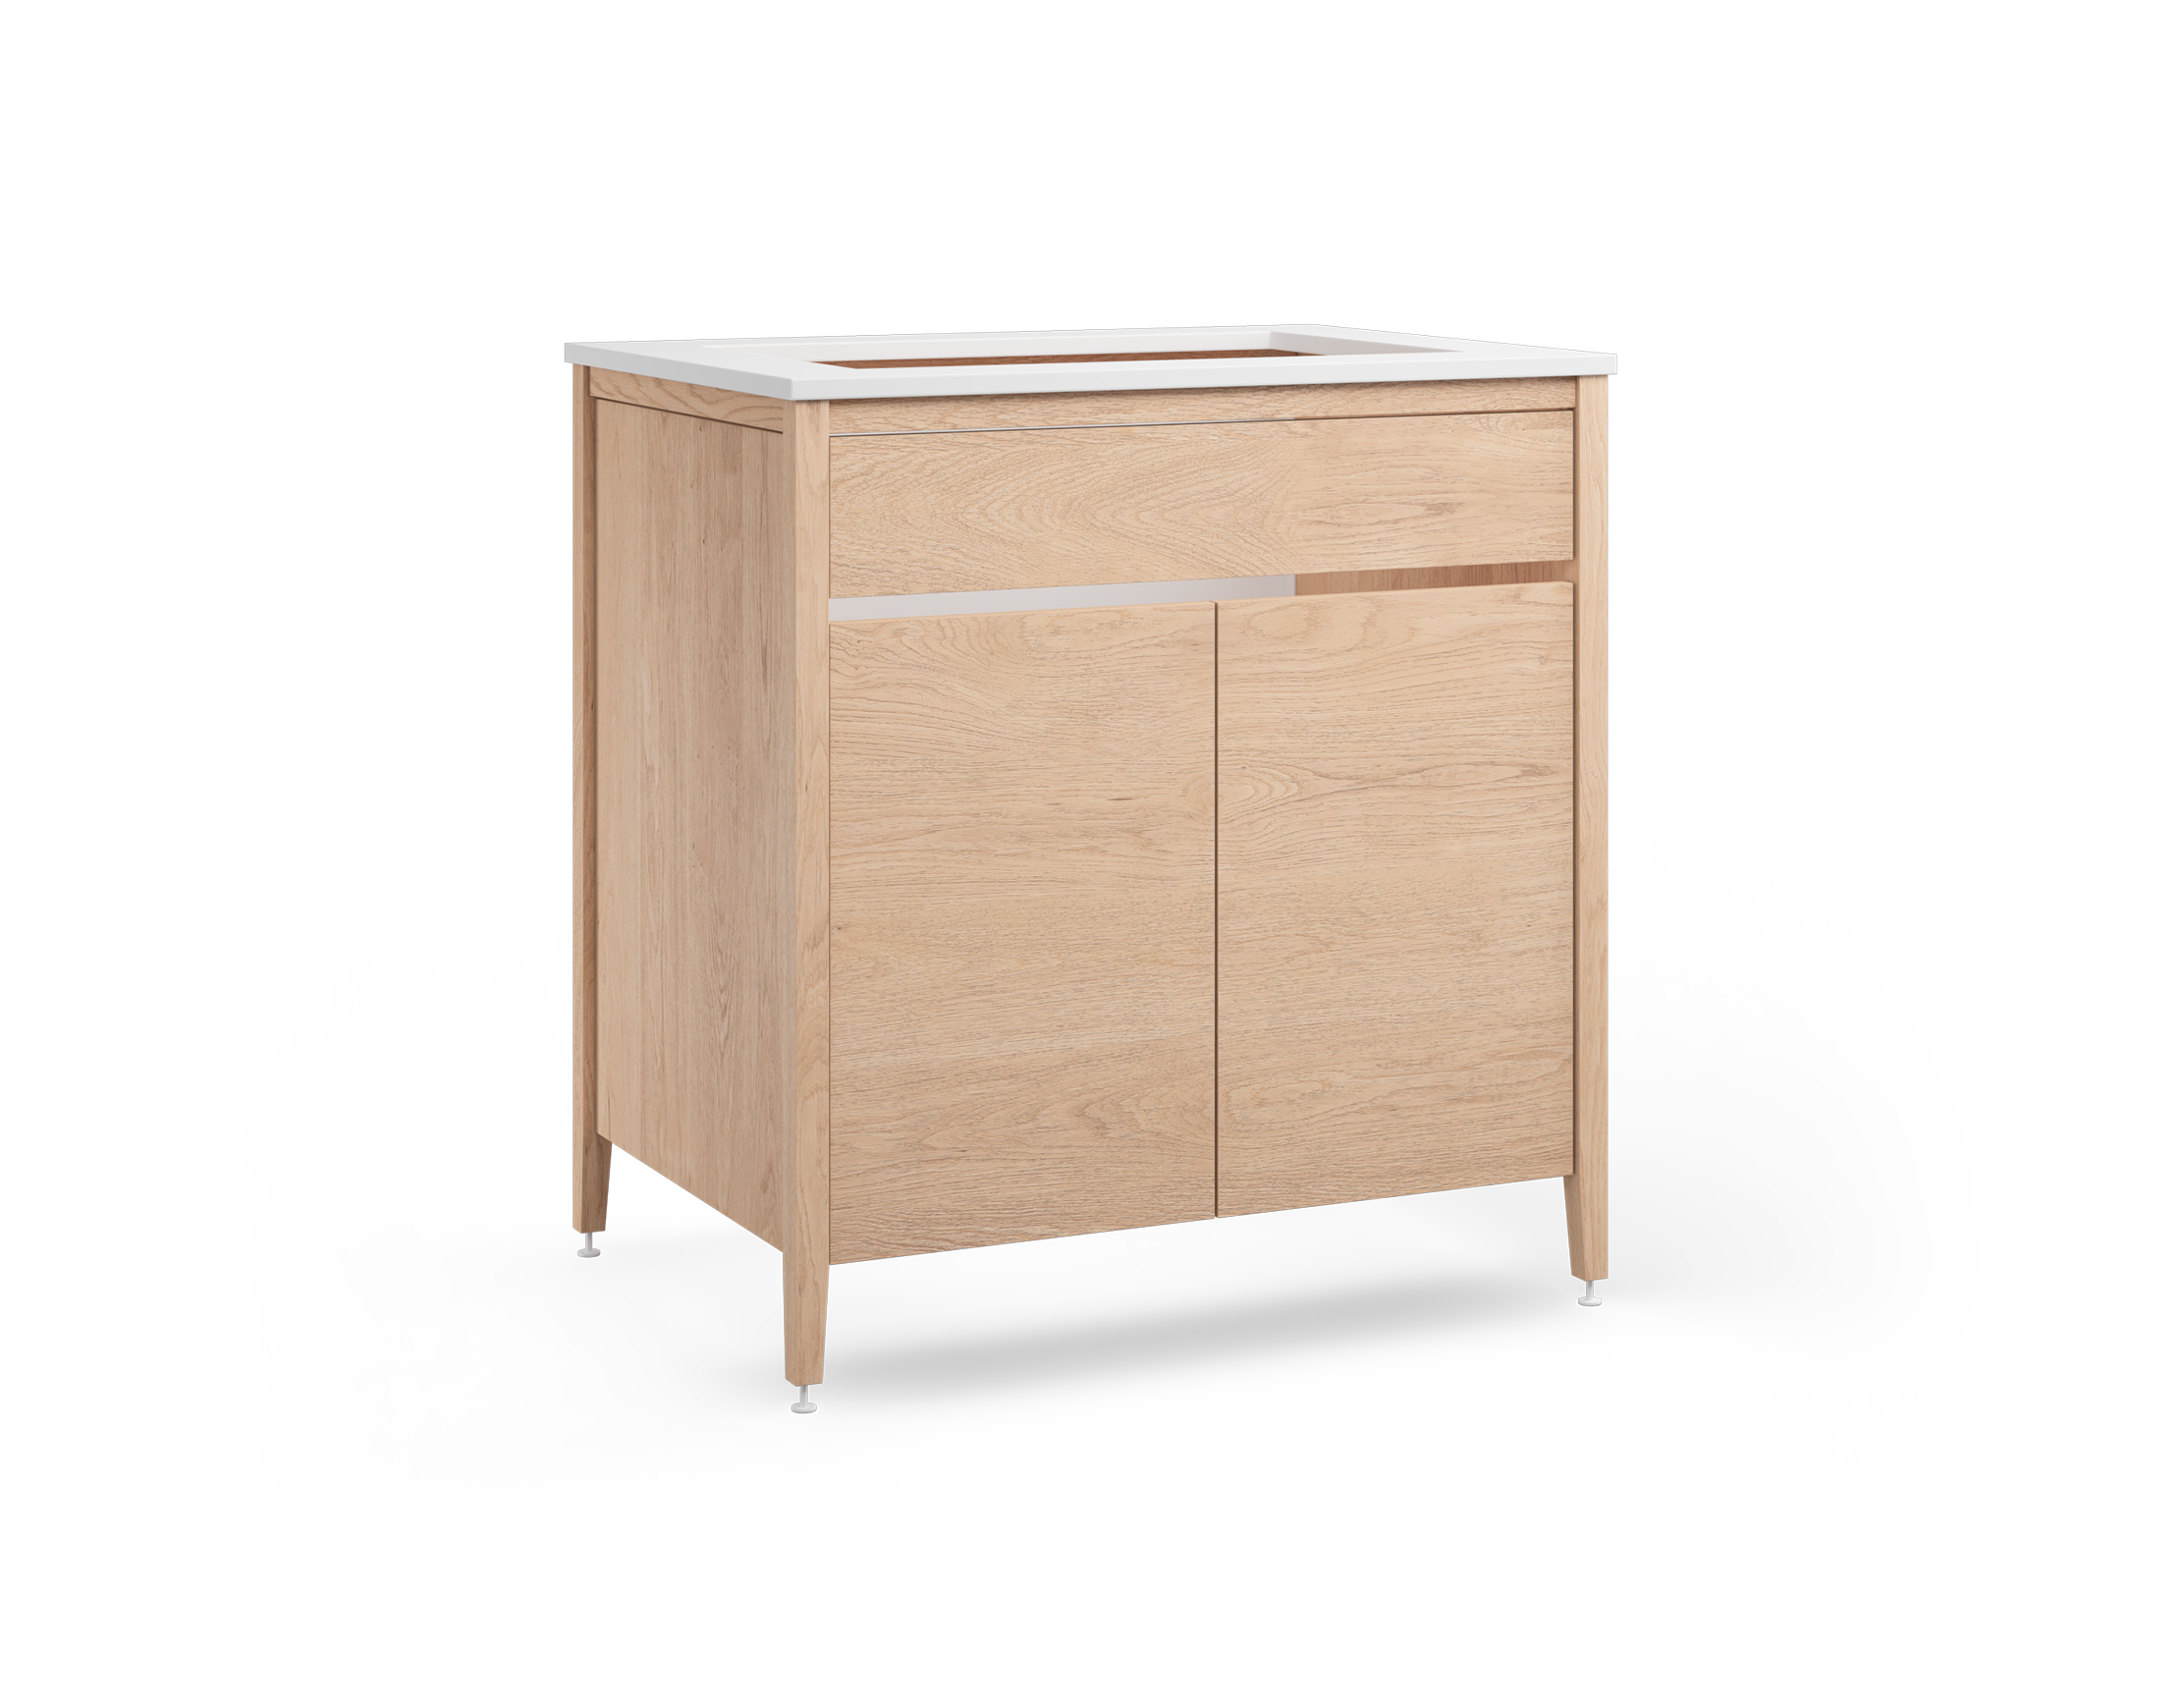 Coquo modular sink cabinet with two doors in natural oak + tall metal back. 